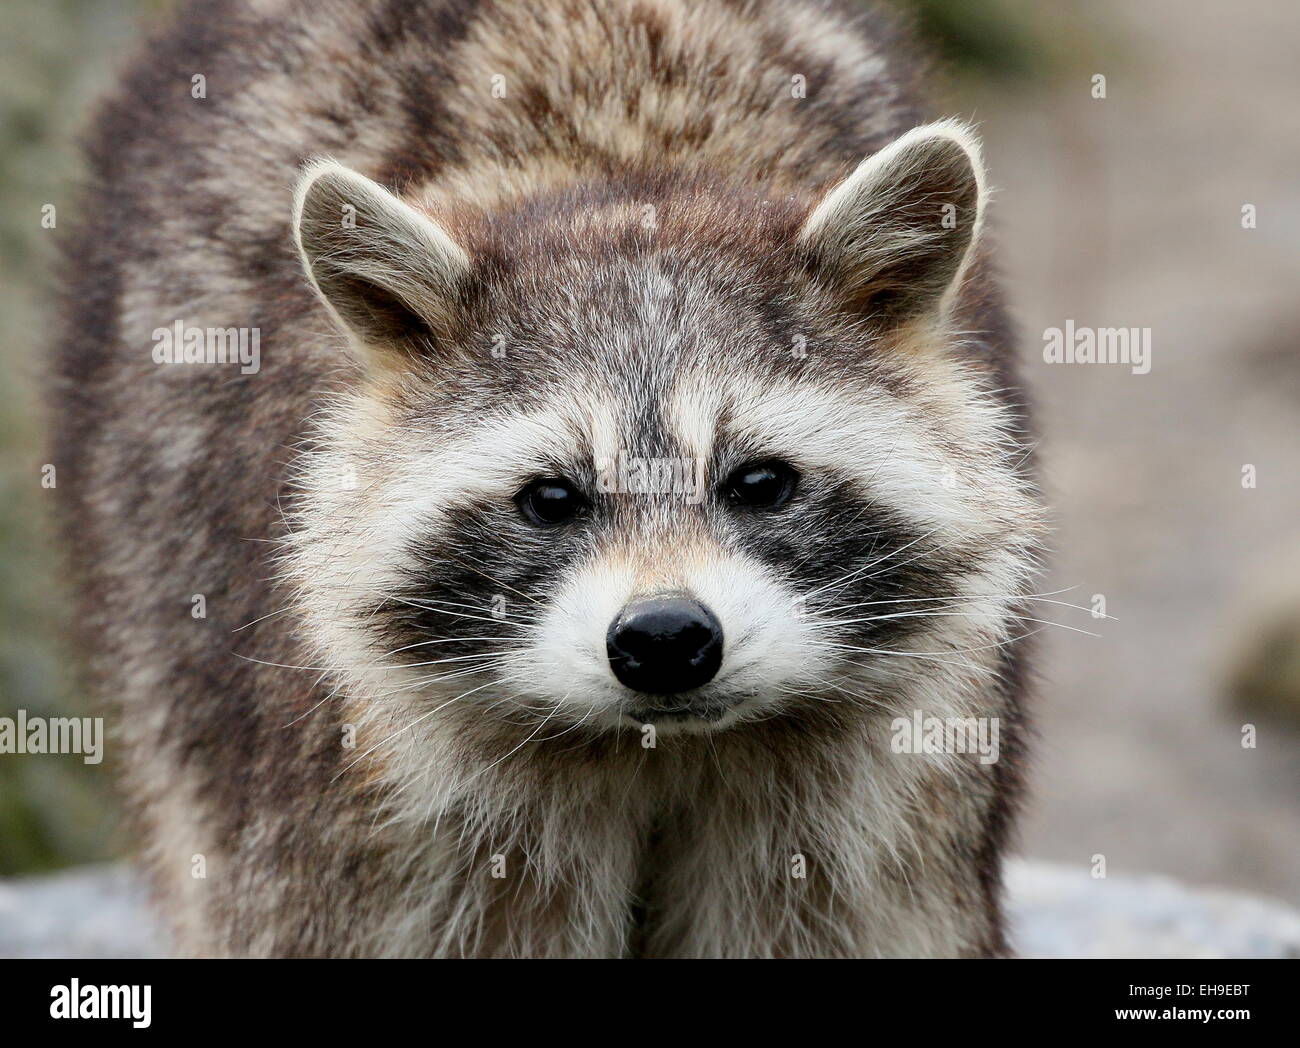 North American or  northern raccoon ( Procyon lotor) close-up of the head, facing camera Stock Photo